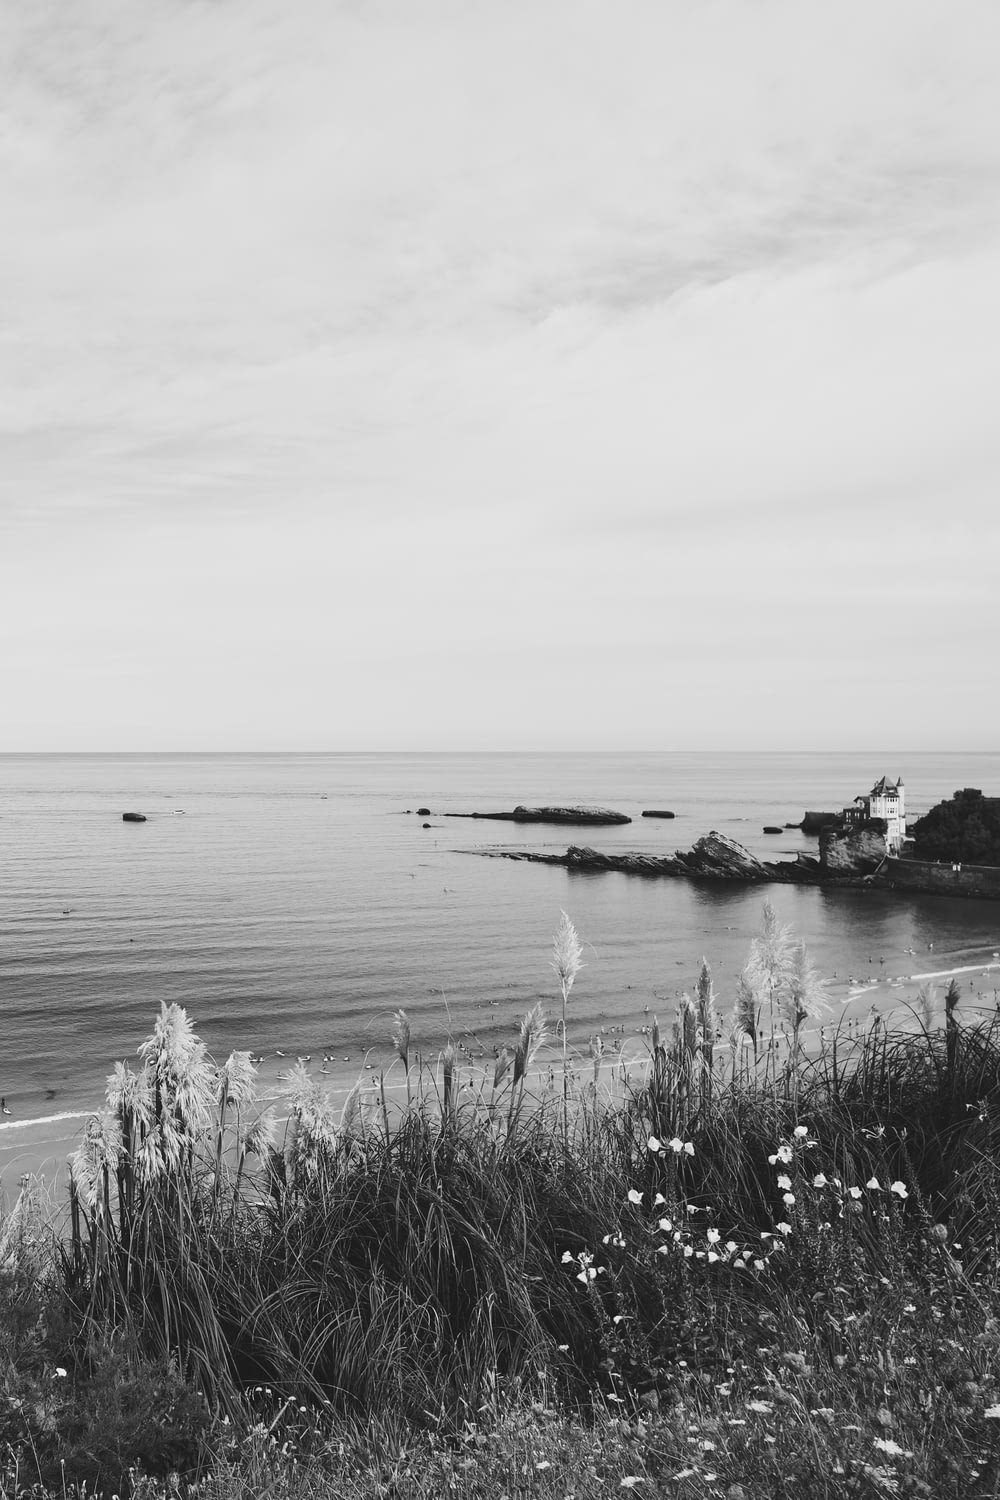 grayscale photo of boat on sea